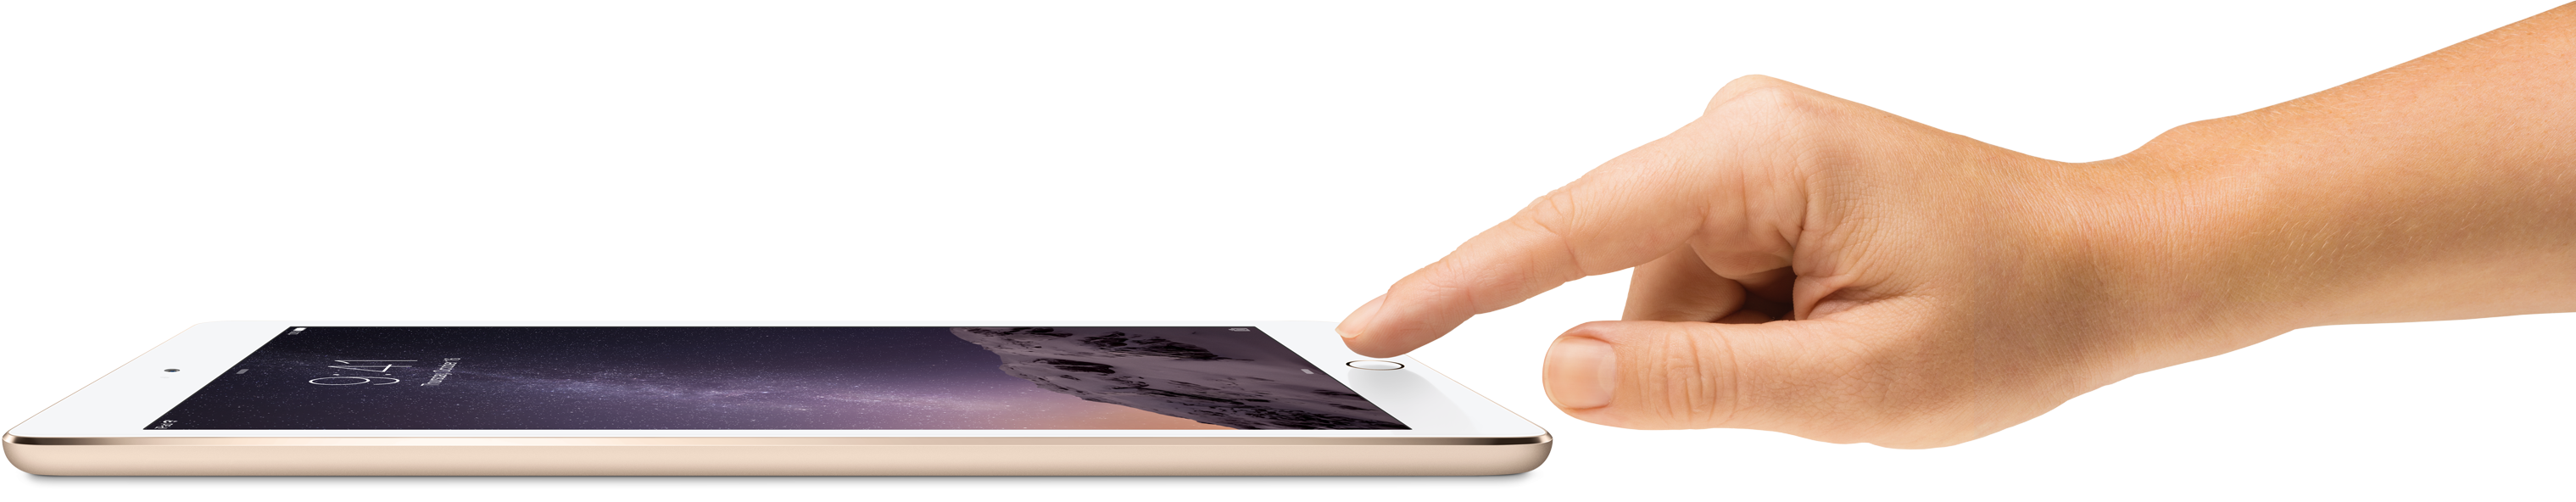 https://www.apple.com/v/ipad-air-2/a/images/overview/touch_id_large.png